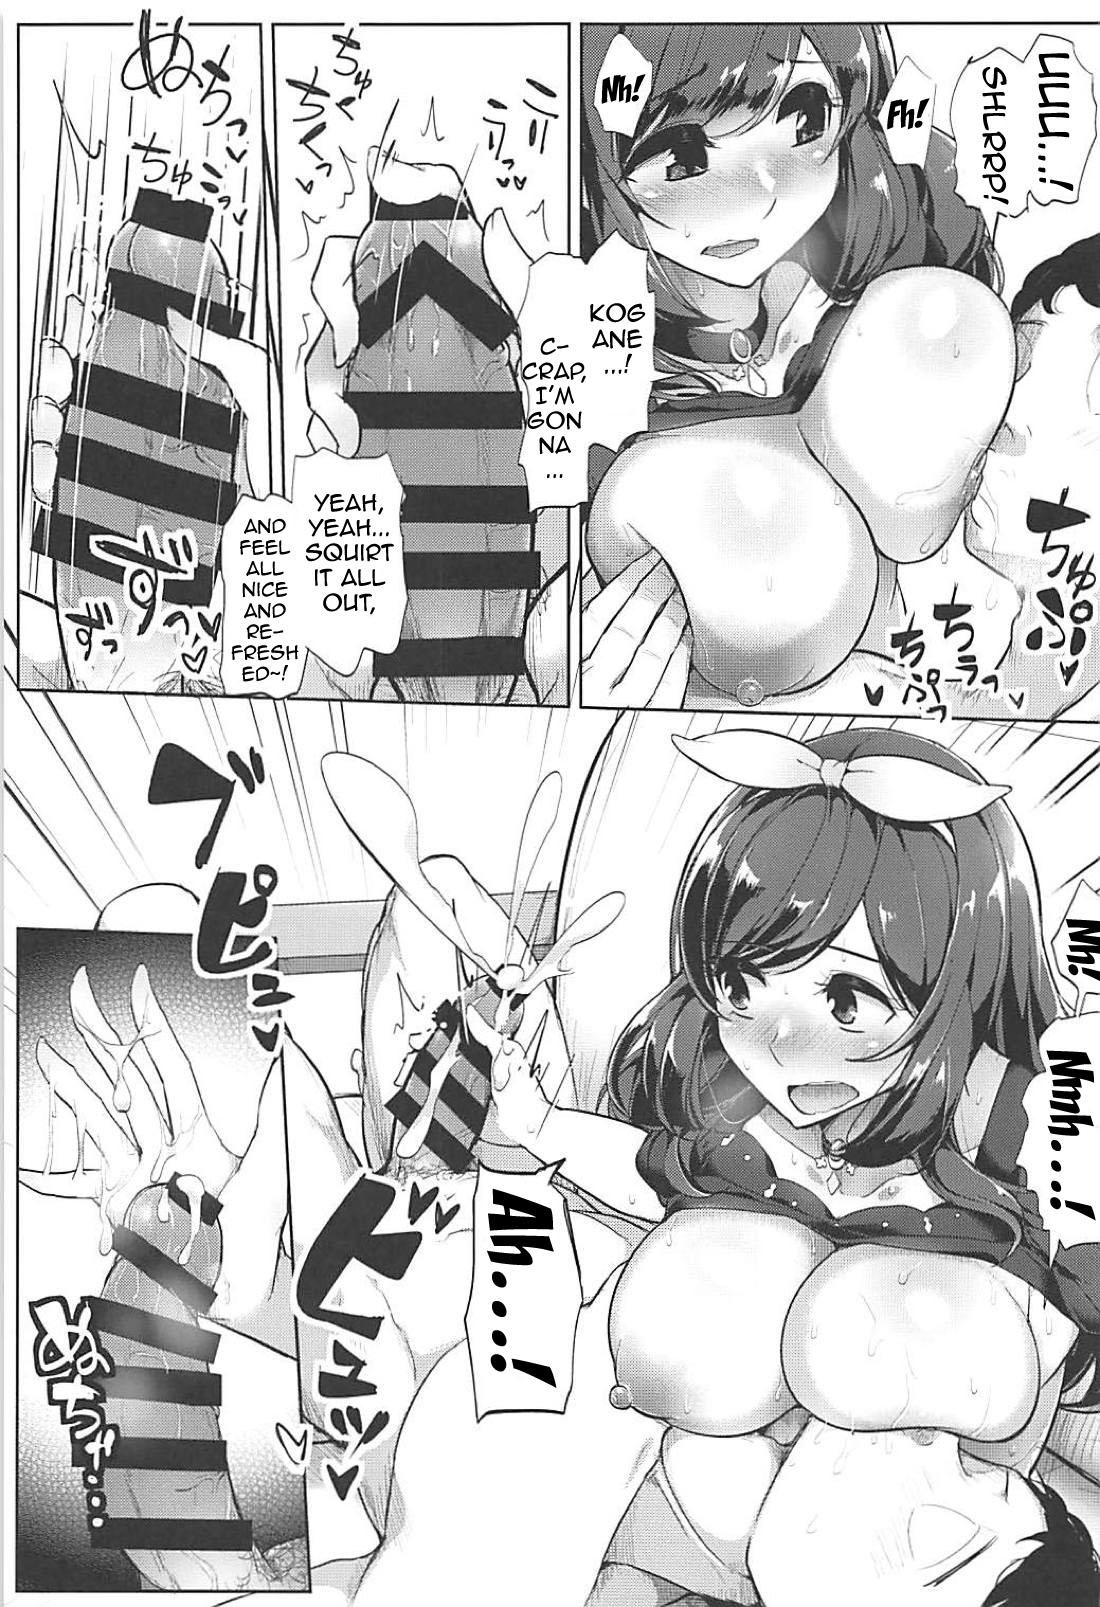 Groupfuck P e no Suki wa Tomeraren bai - When I Just Can't Stop Loving The Producer - The idolmaster One - Page 4